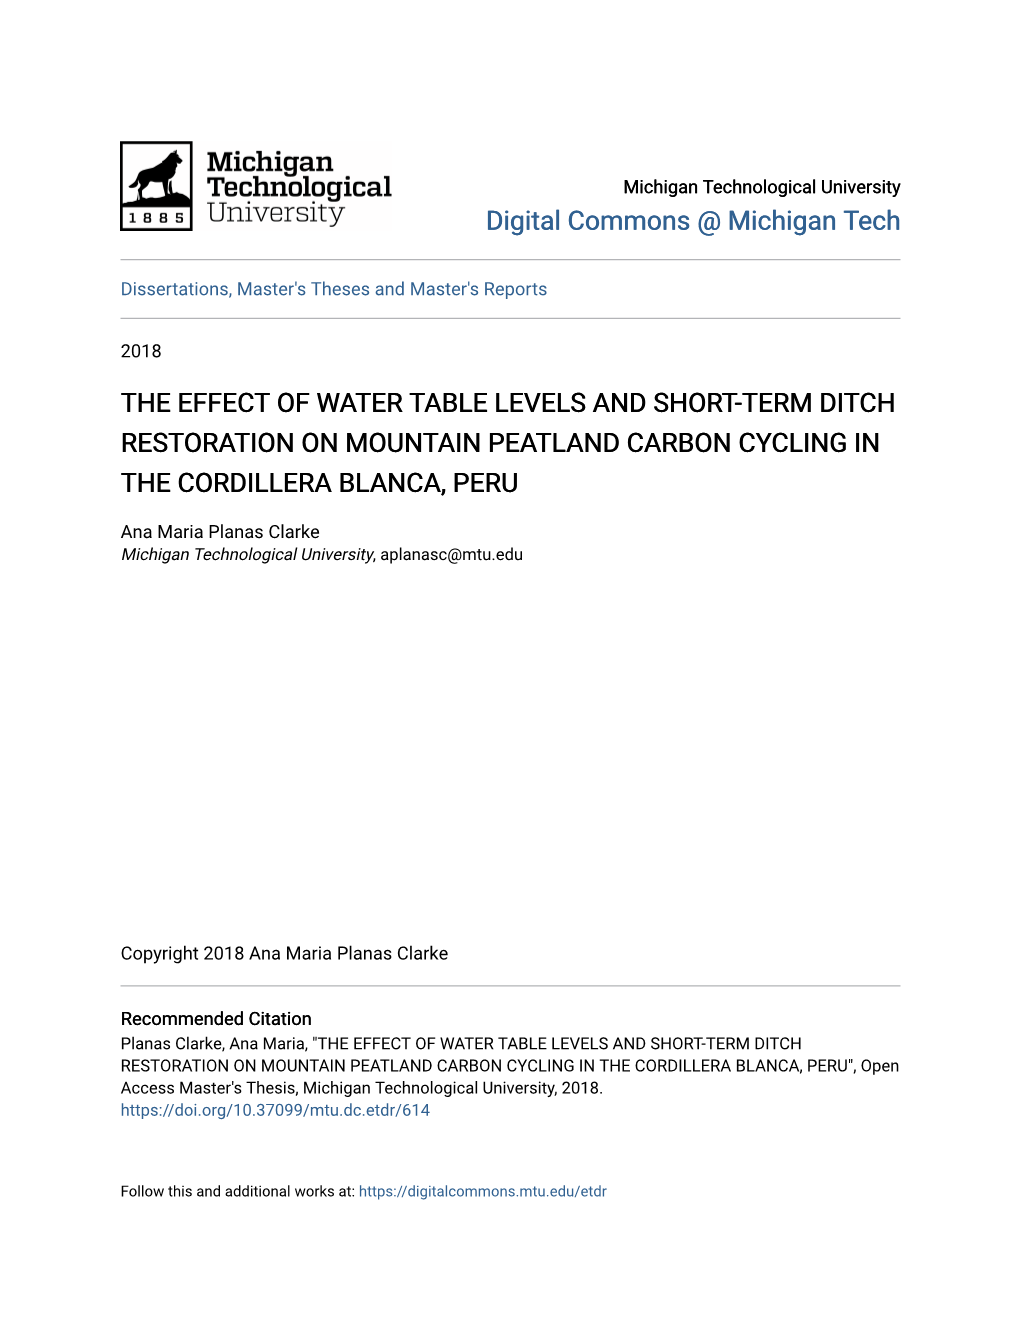 The Effect of Water Table Levels and Short-Term Ditch Restoration on Mountain Peatland Carbon Cycling in the Cordillera Blanca, Peru